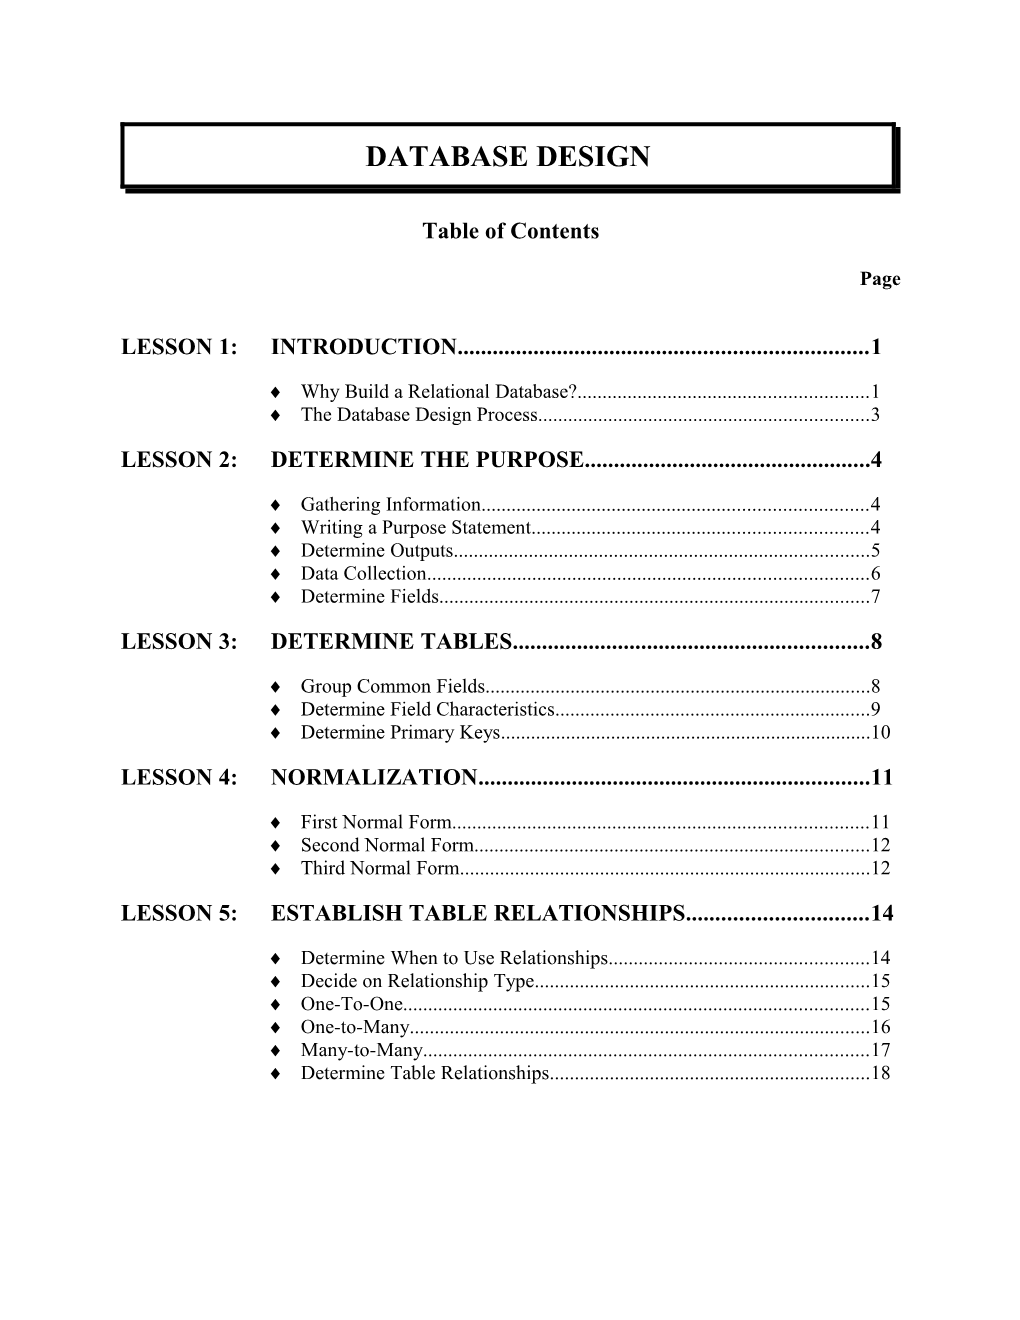 Table of Contents s45